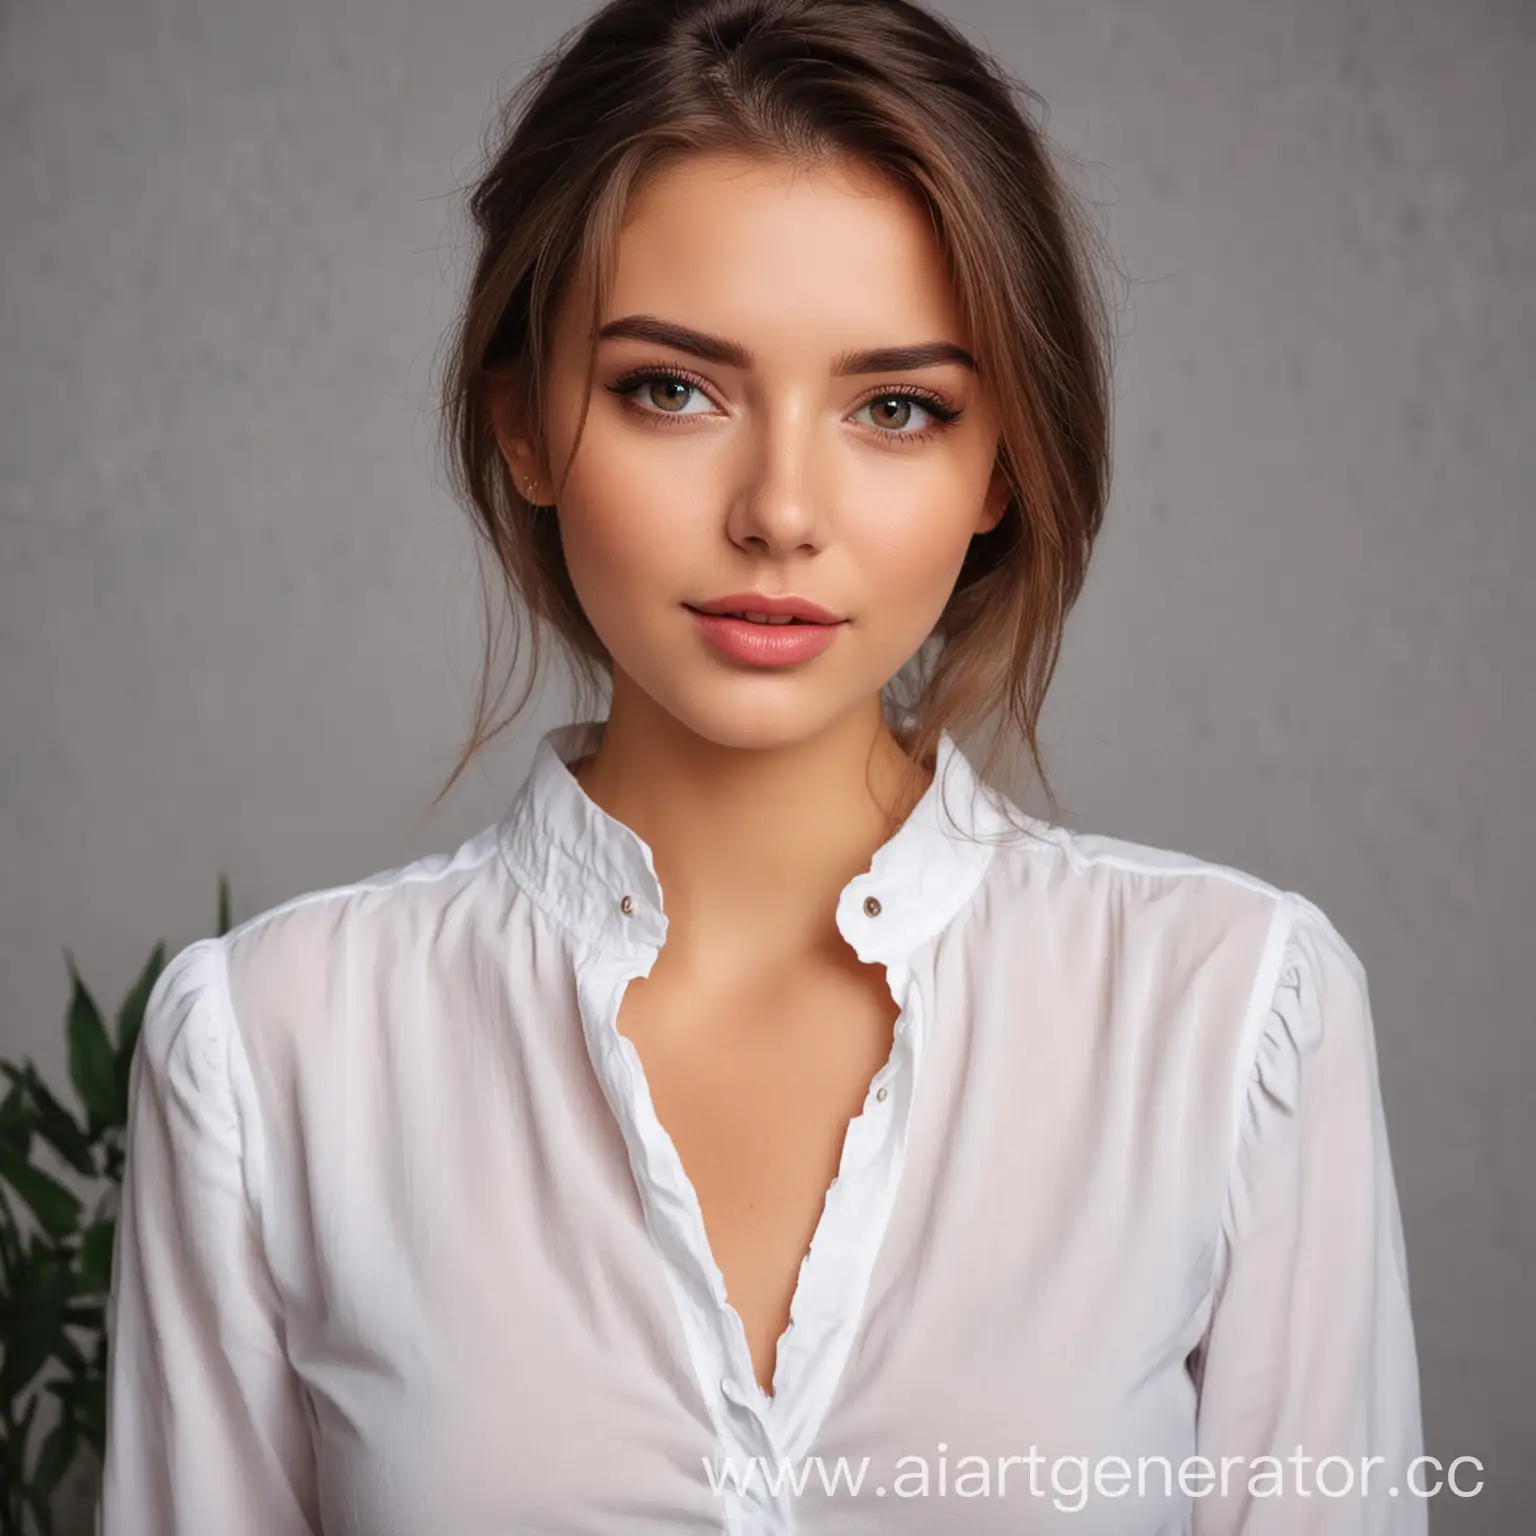 Elegant-Young-Woman-in-White-Blouse-Poses-Gracefully